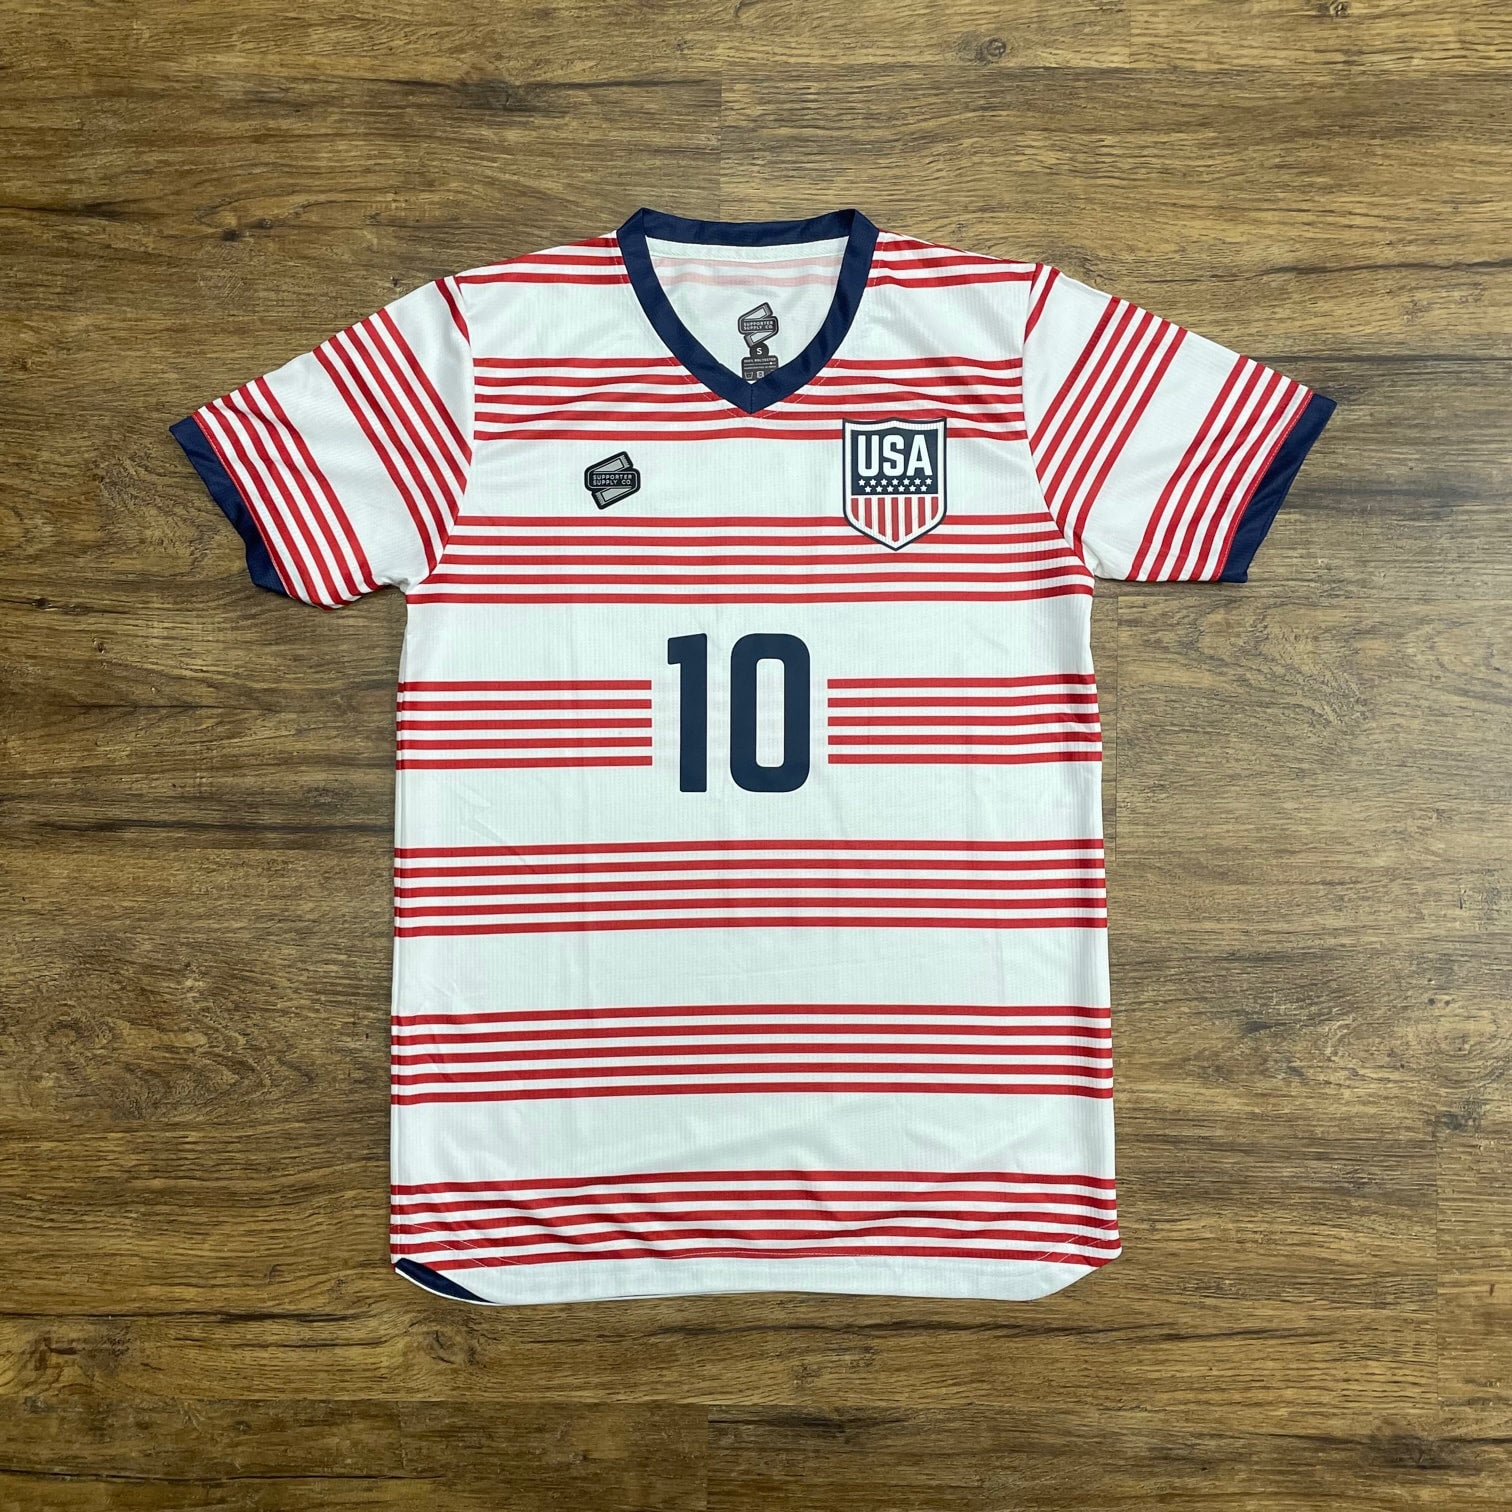  SUPPORTER SUPPLY CO. Short Sleeve Bomb Pop USA Soccer Jersey  (Small) Red/White/Blue : Sports & Outdoors